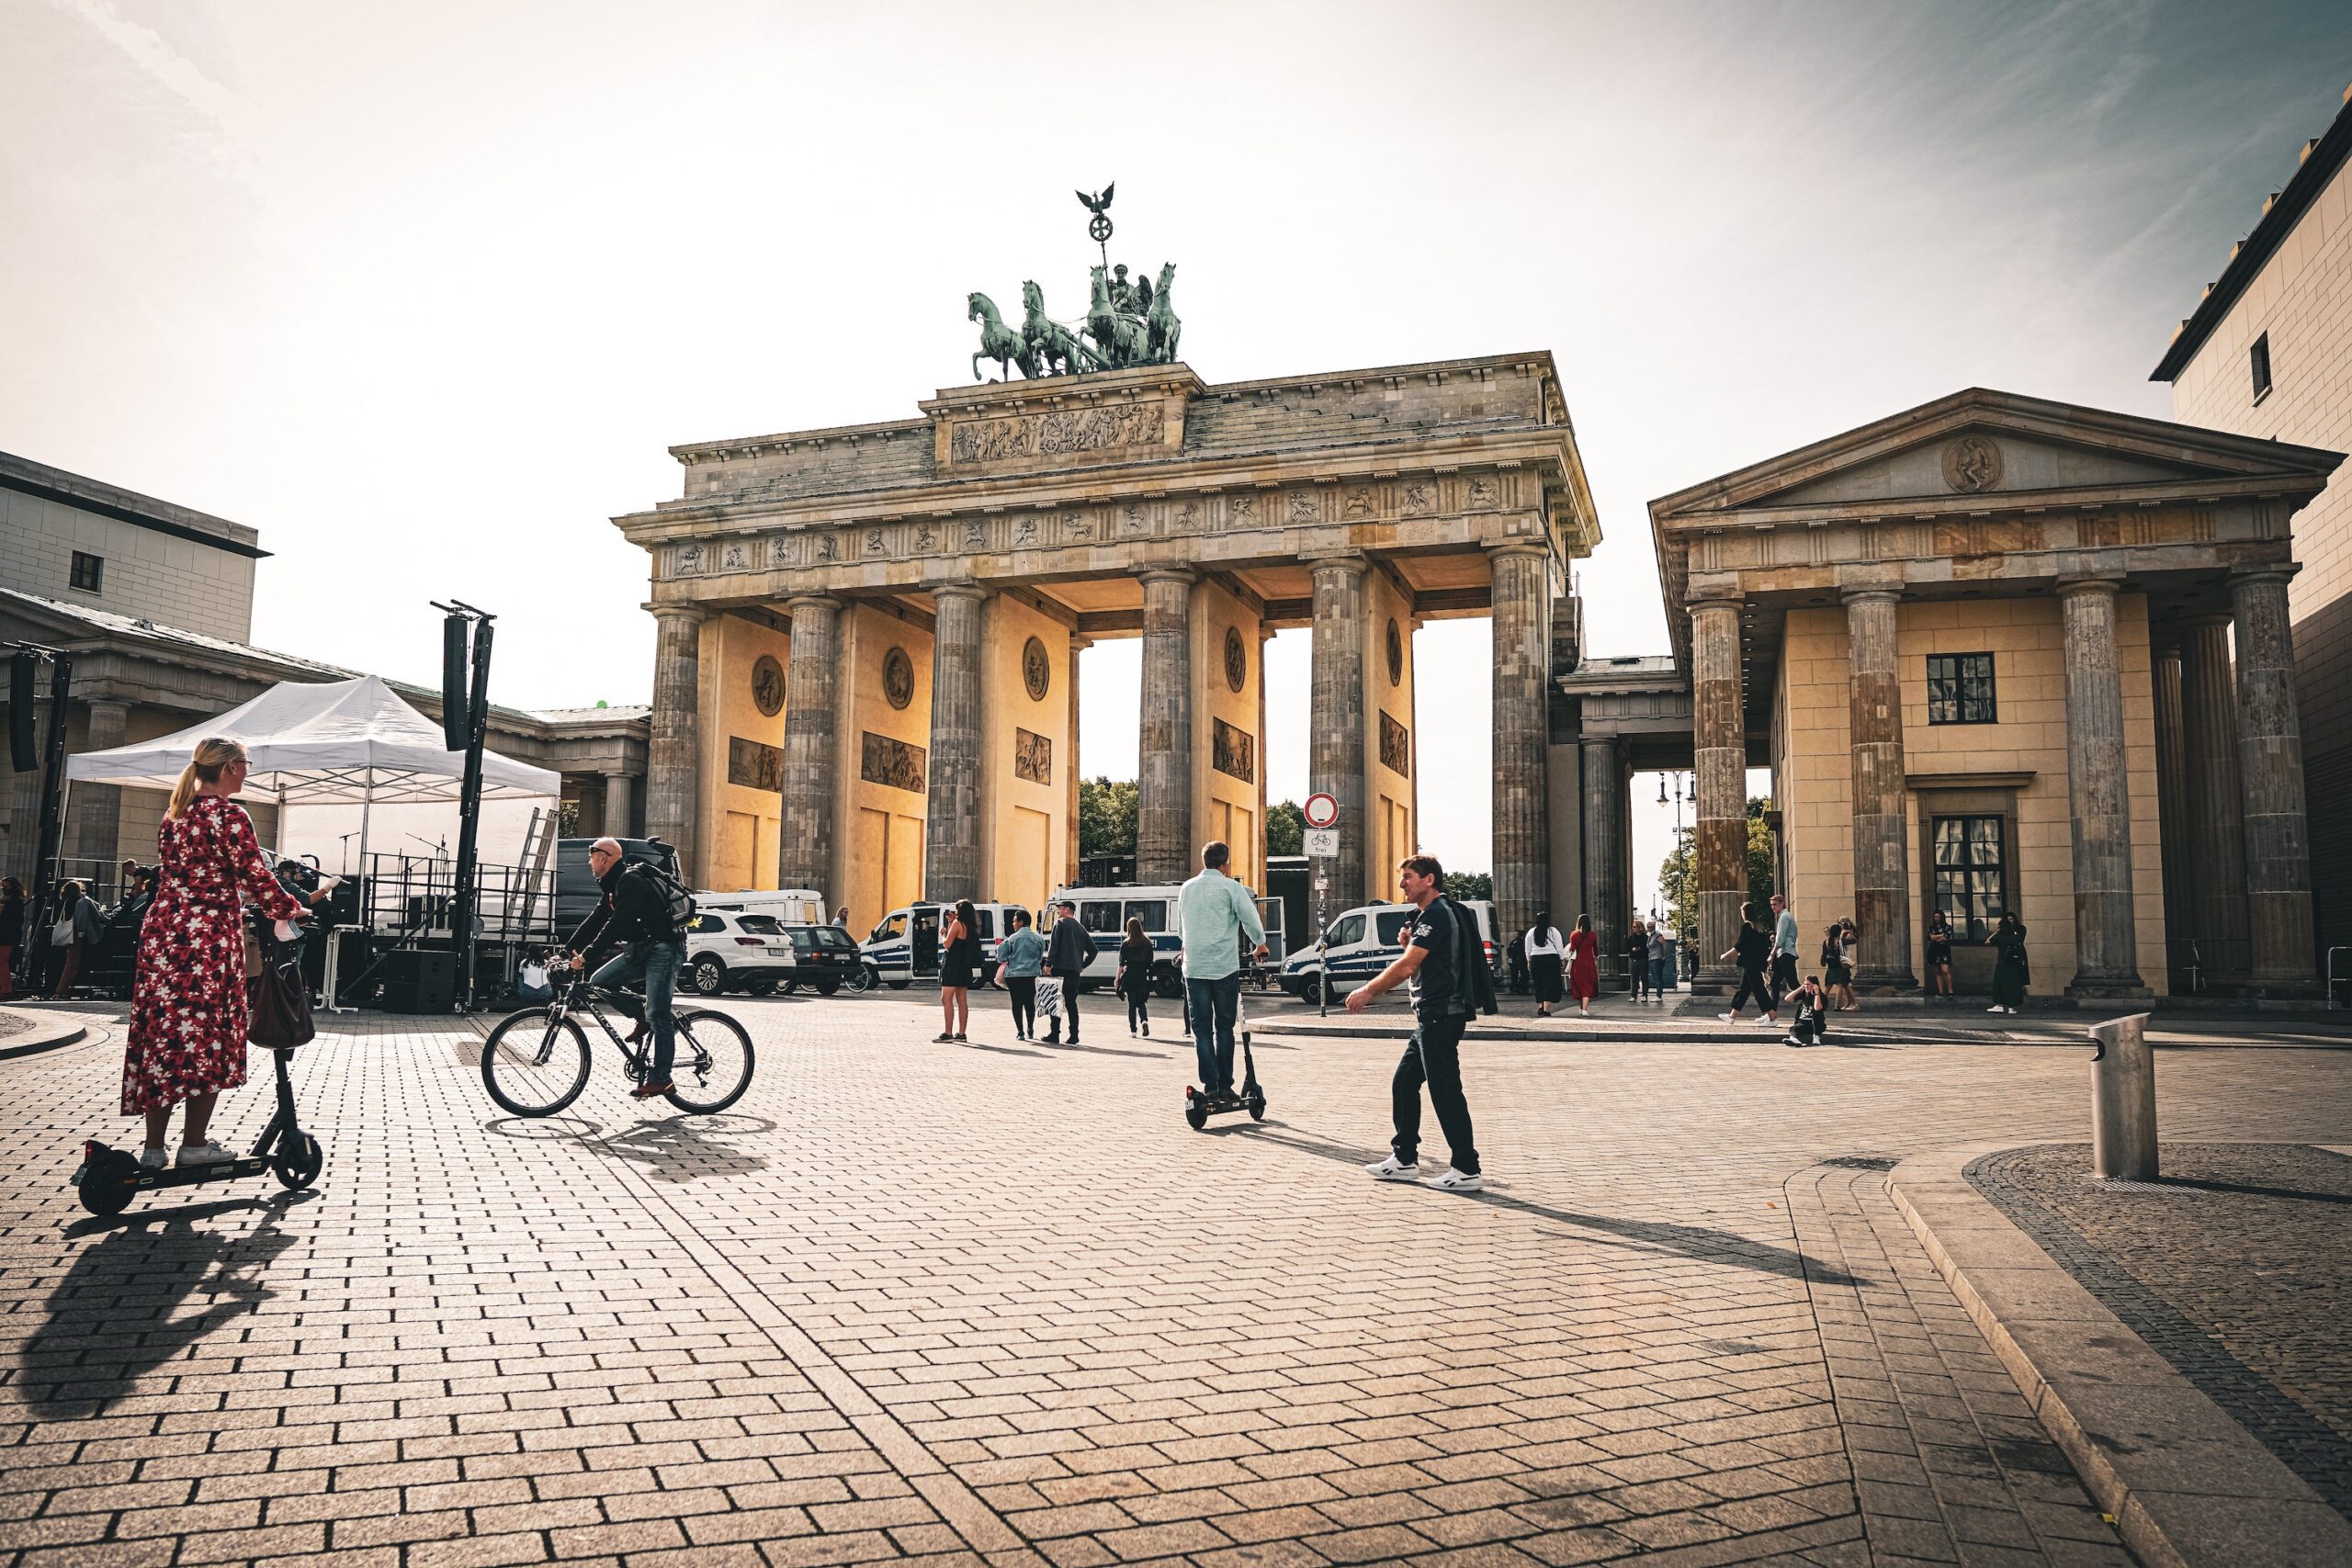 Berlin's economic malaise is putting off Middle East buyers of 'premium assets'